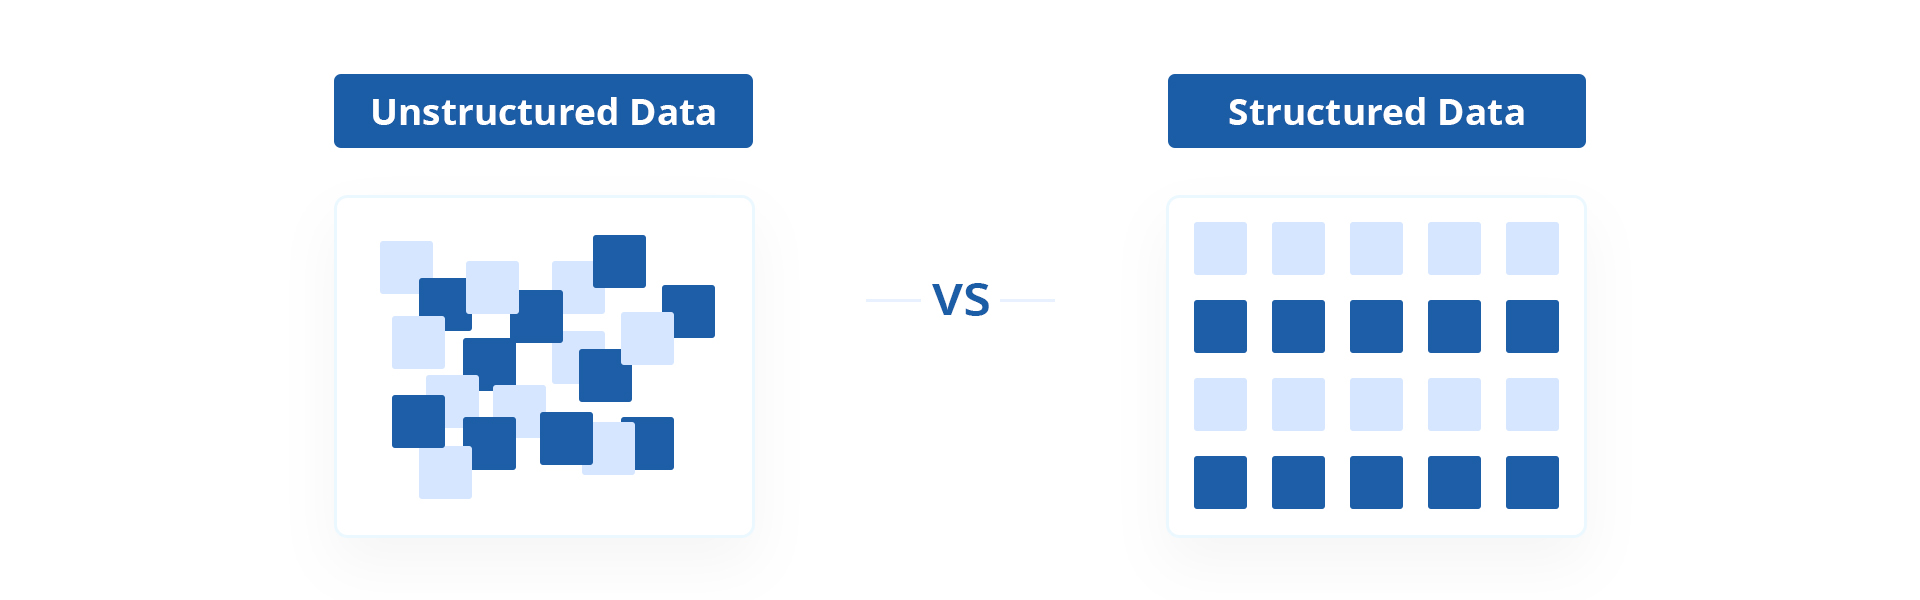 A graphic comparing unstructured and structured data.